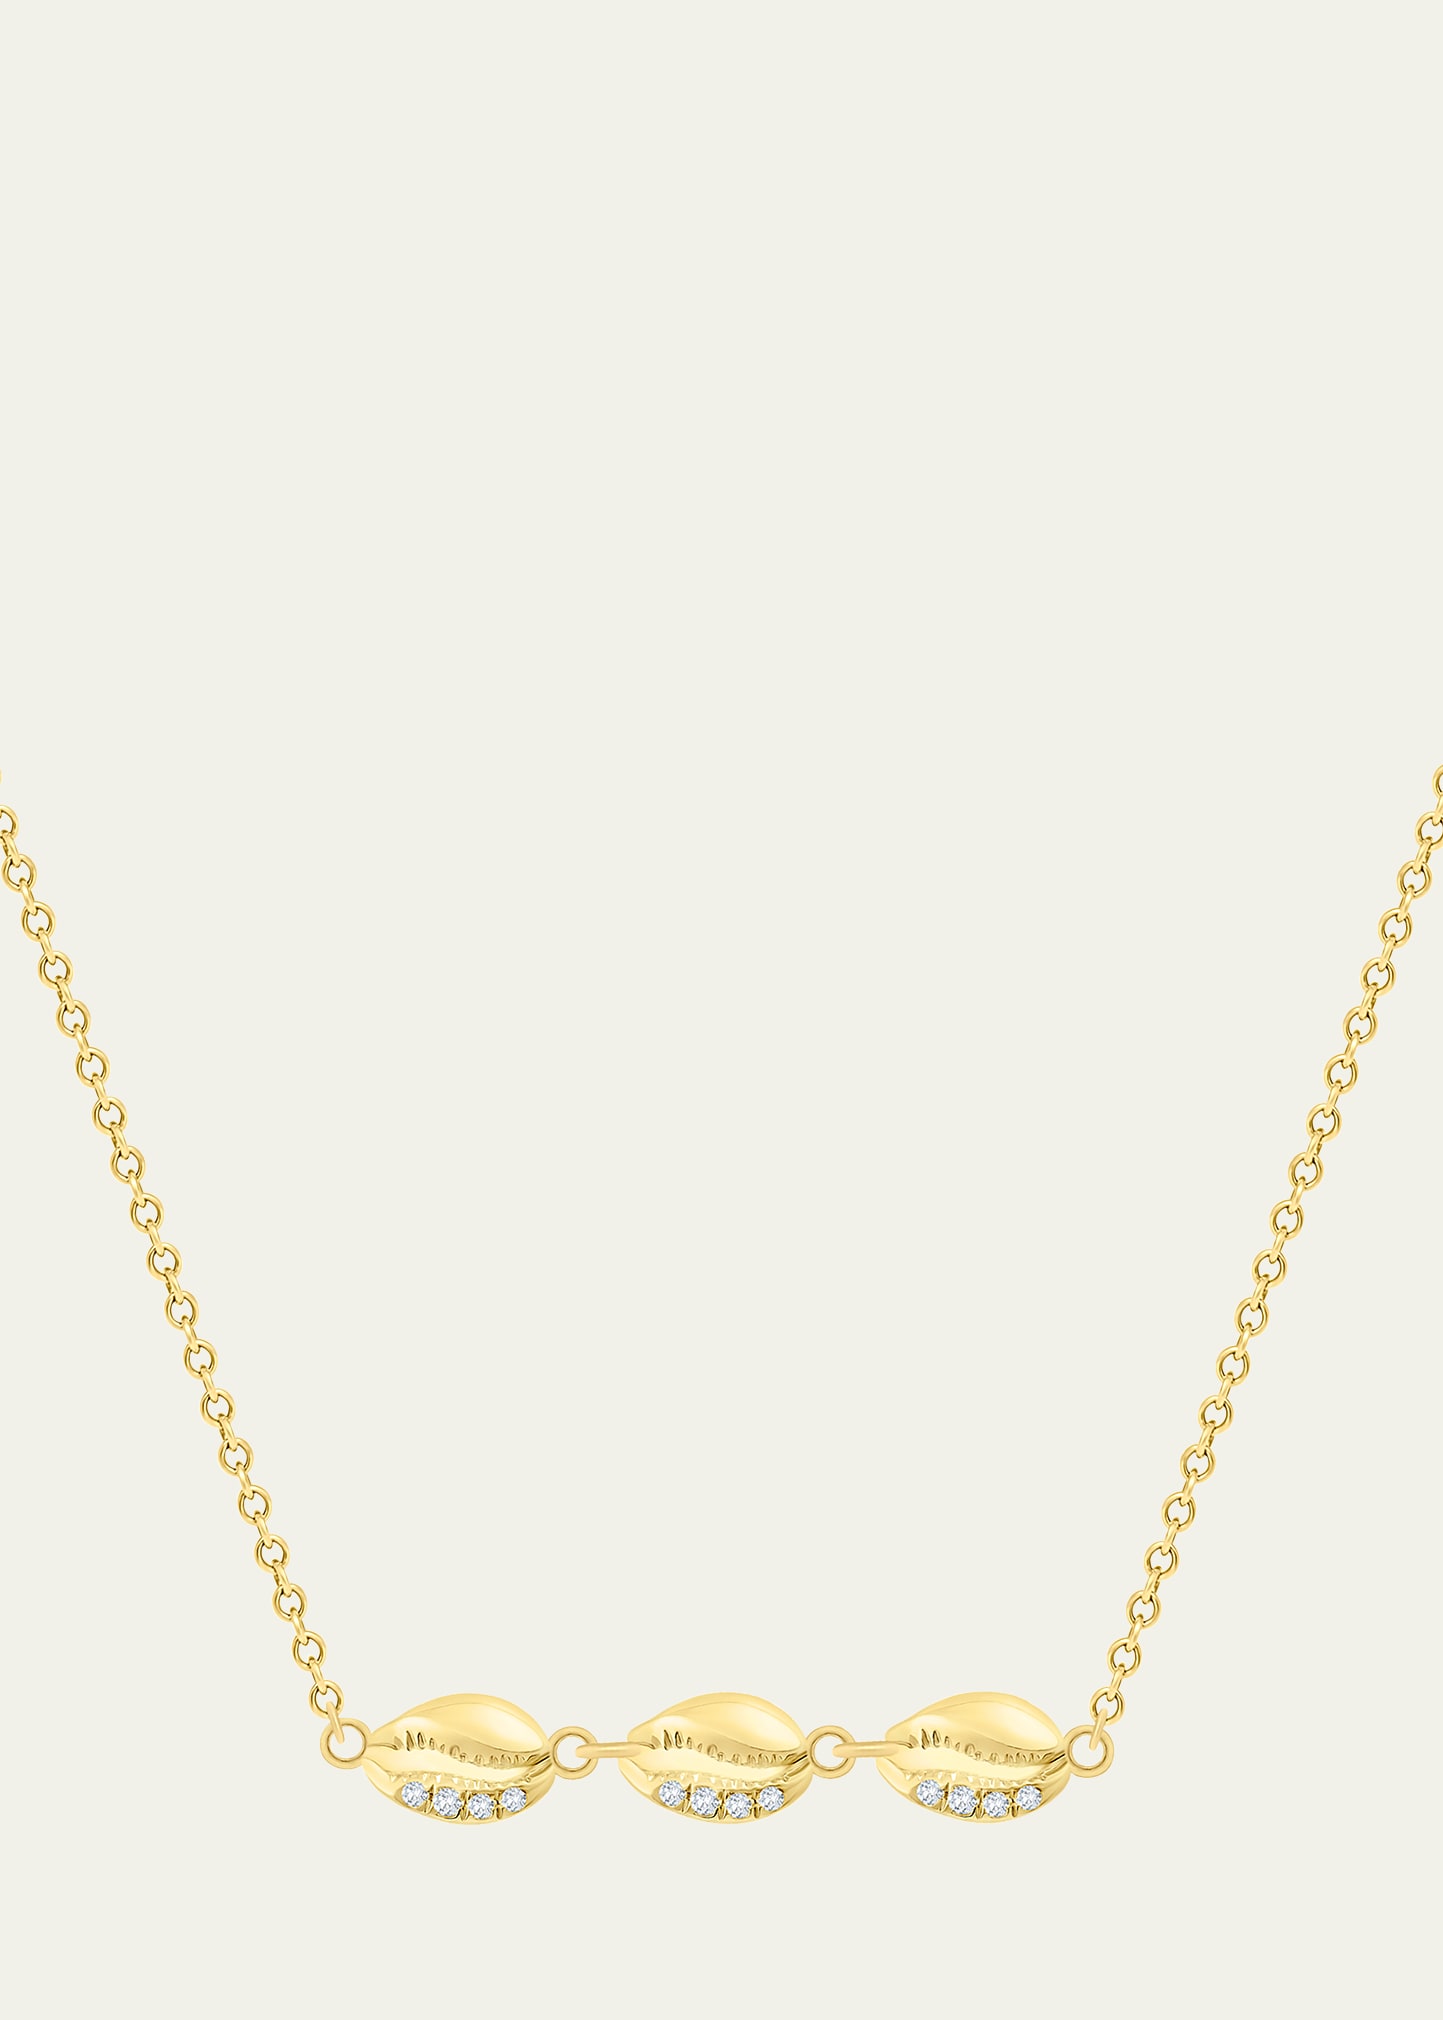 Almasika 18k Yellow Gold Le Cauri Endiamant Triple Shell Necklace, 16"l In Yg